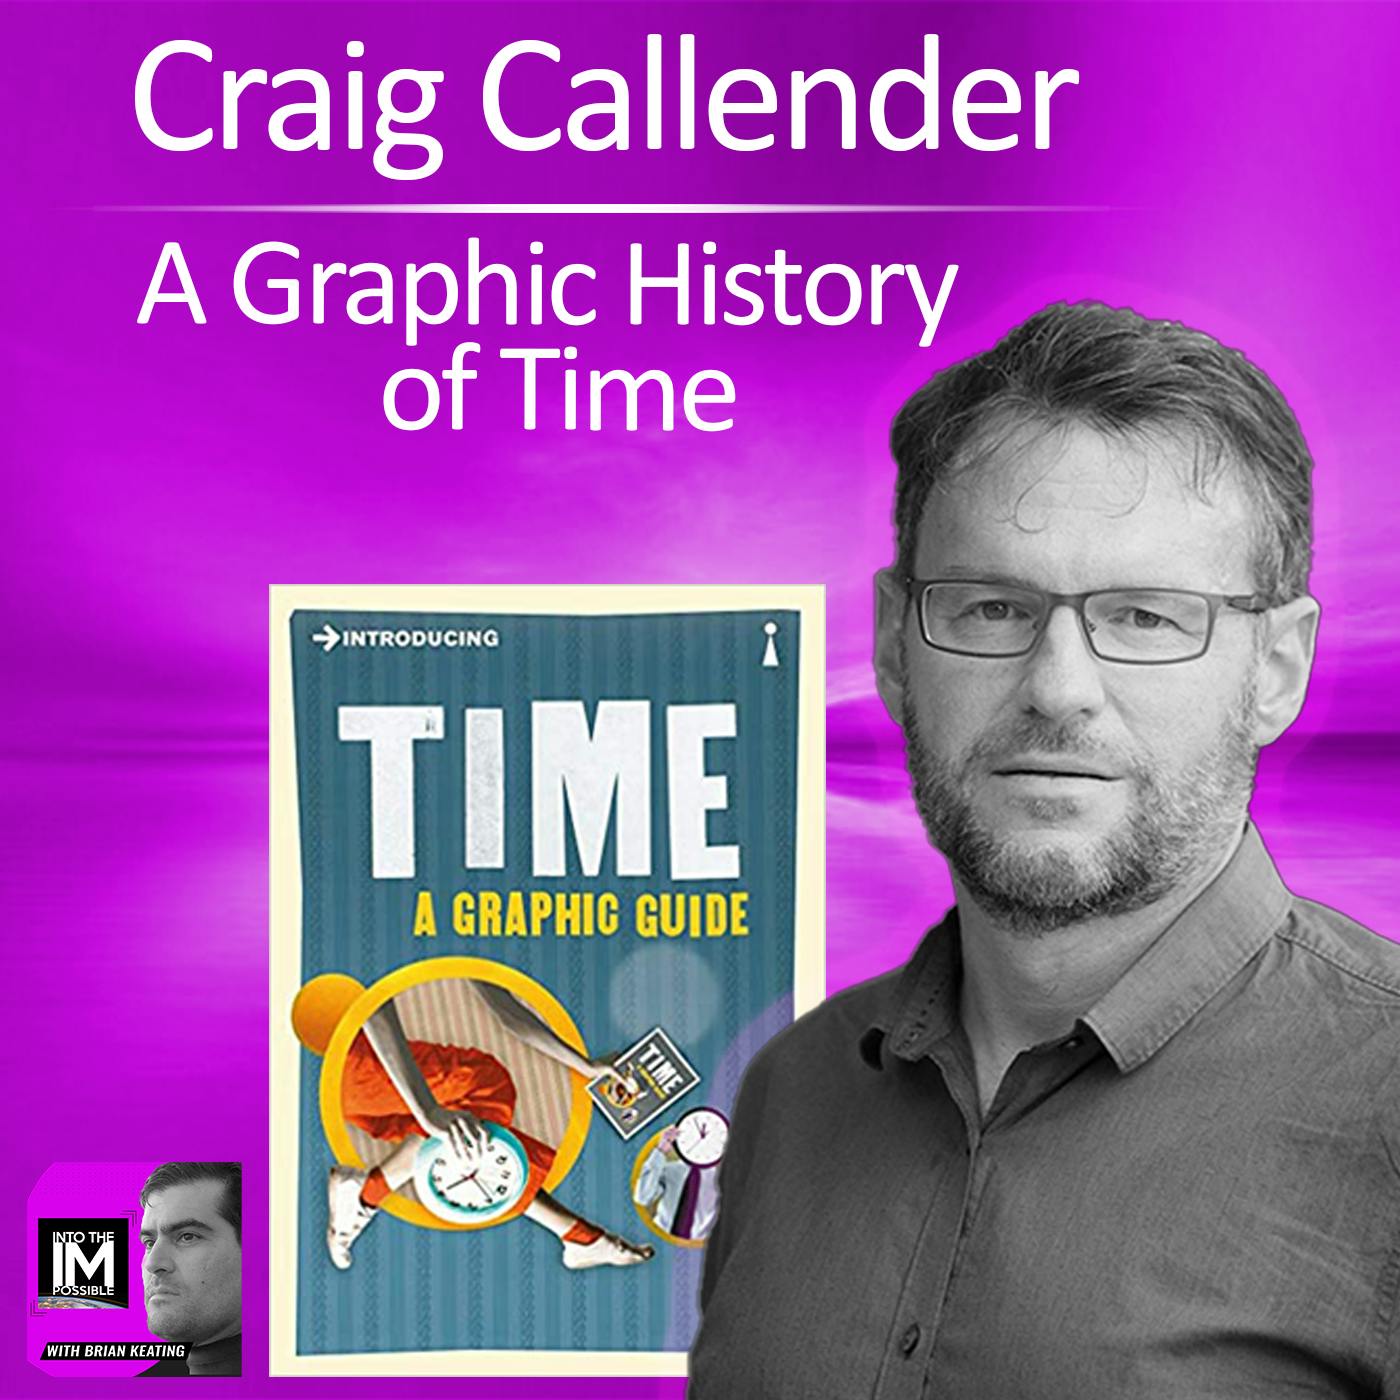 Craig Callender: A Graphic History of Time ​(#196)